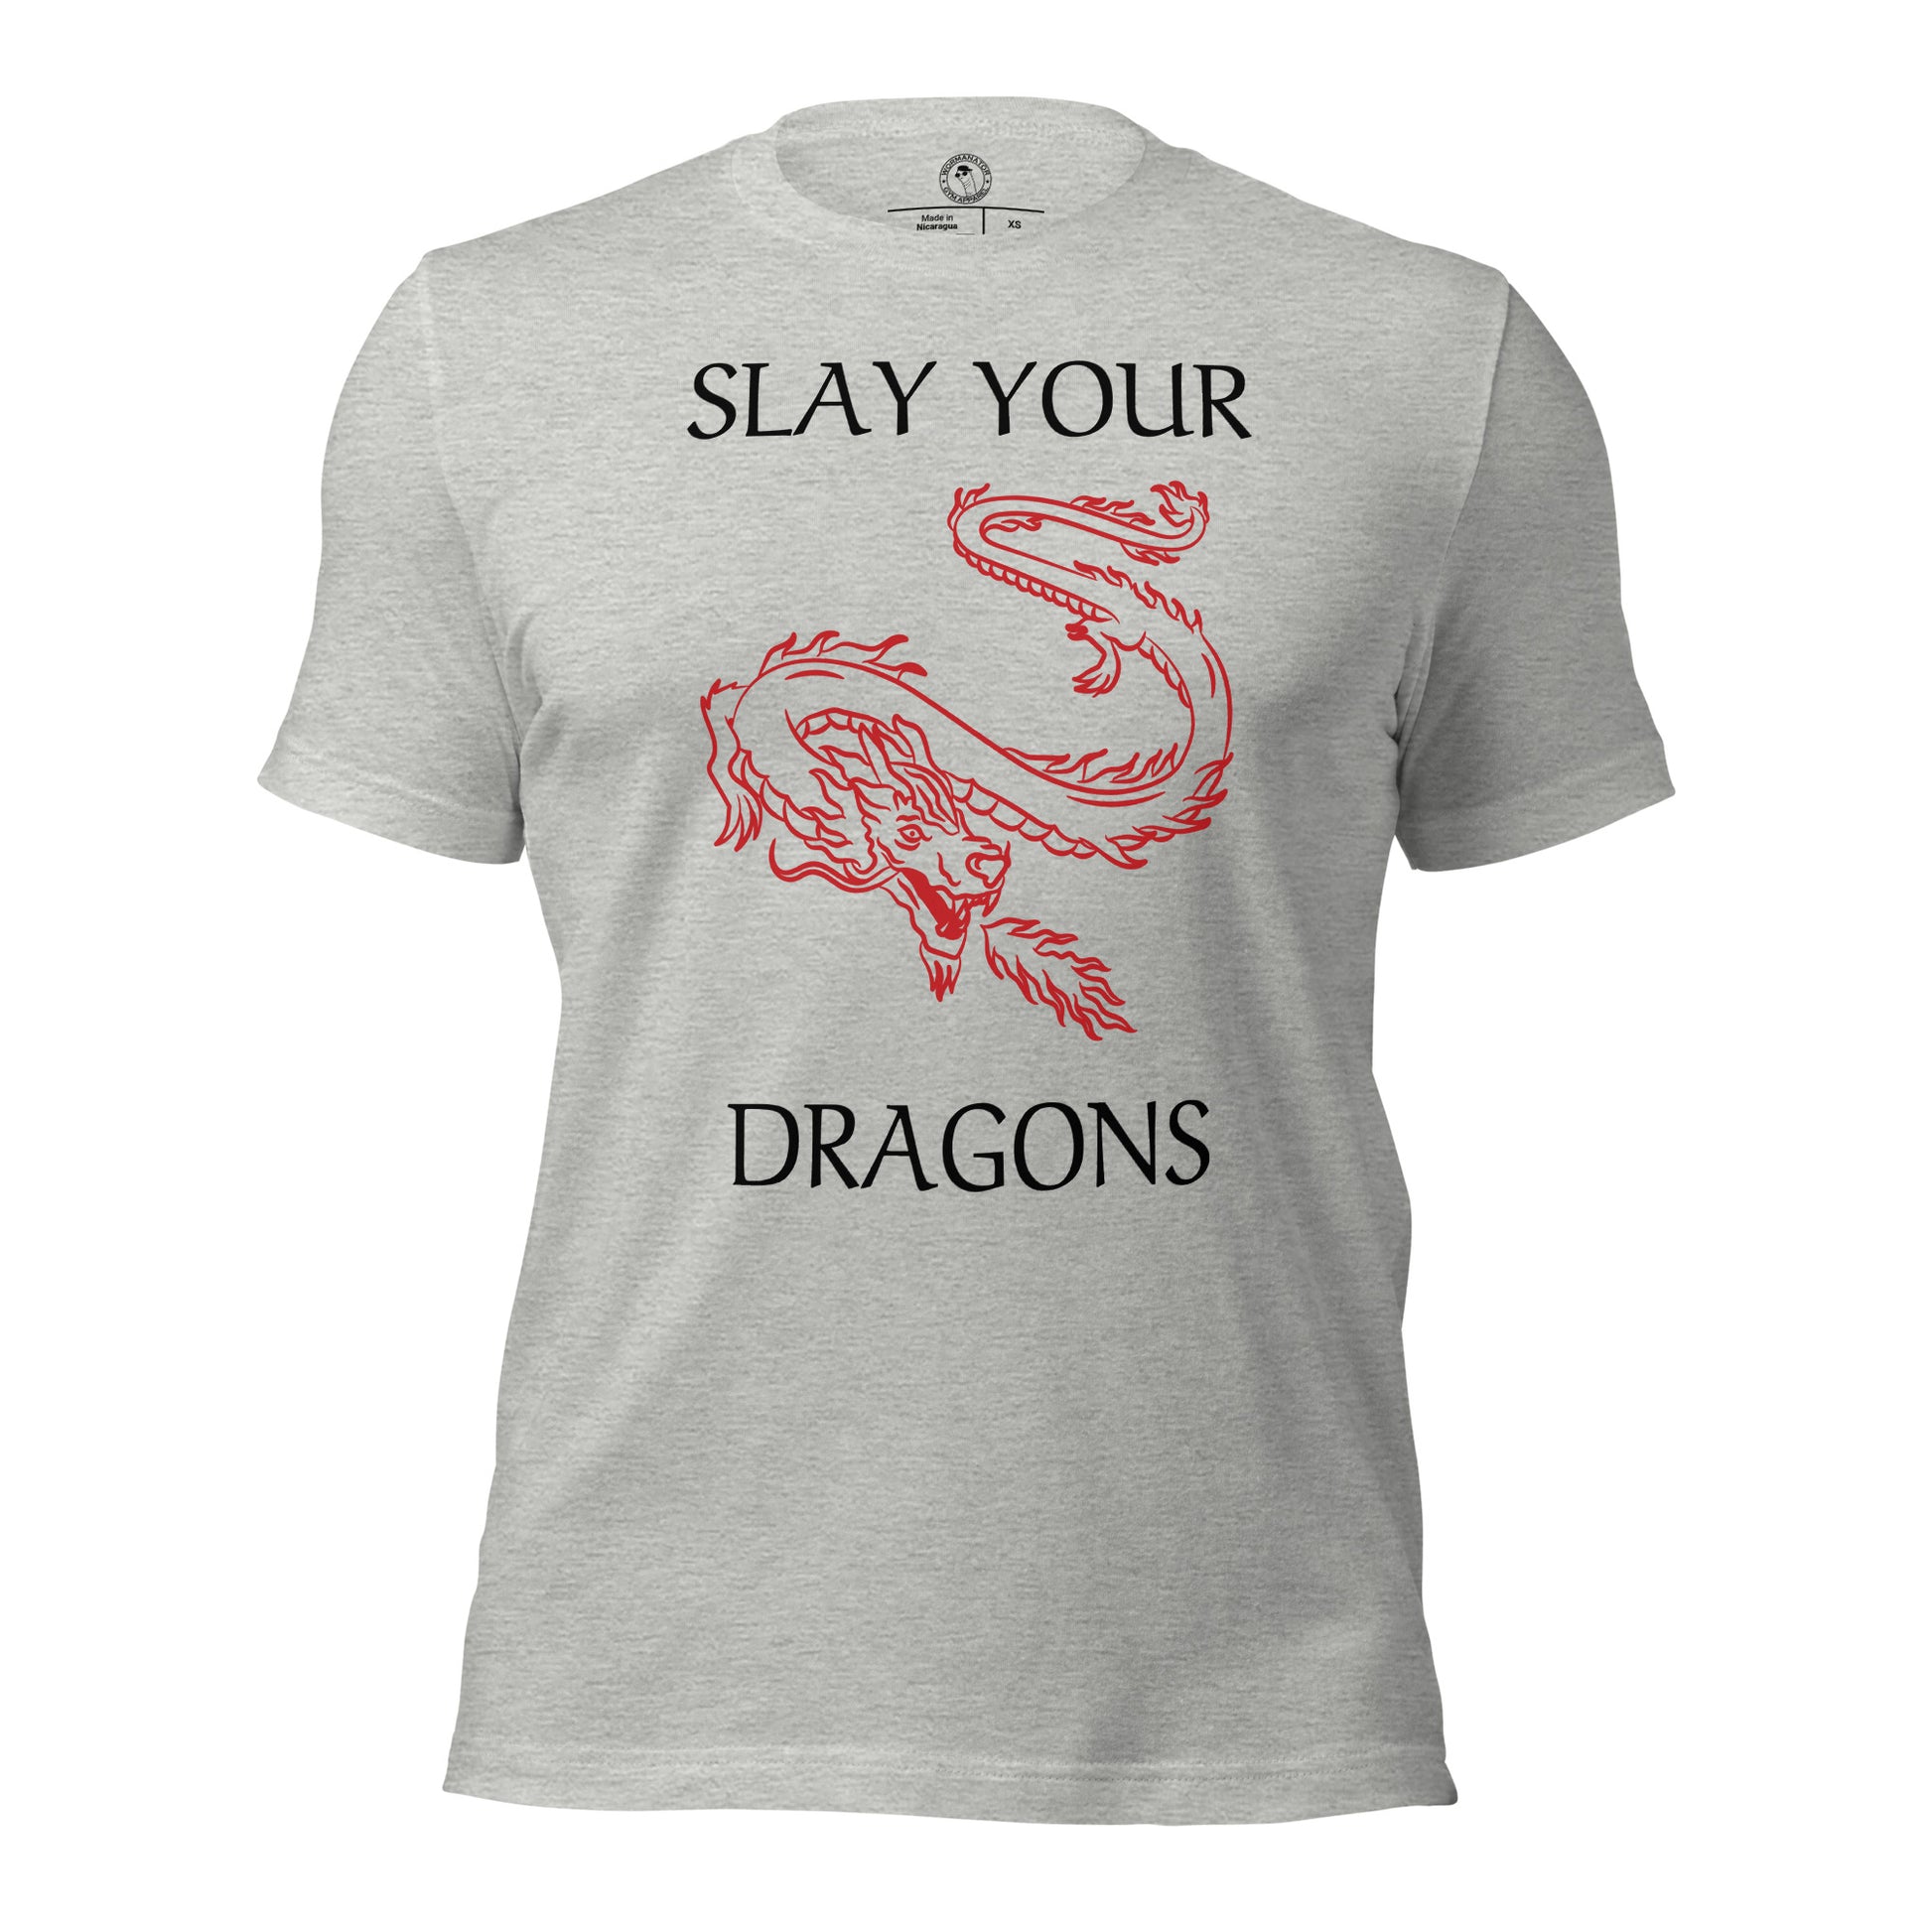 Slay Your Dragons Shirt in Athletic Heather